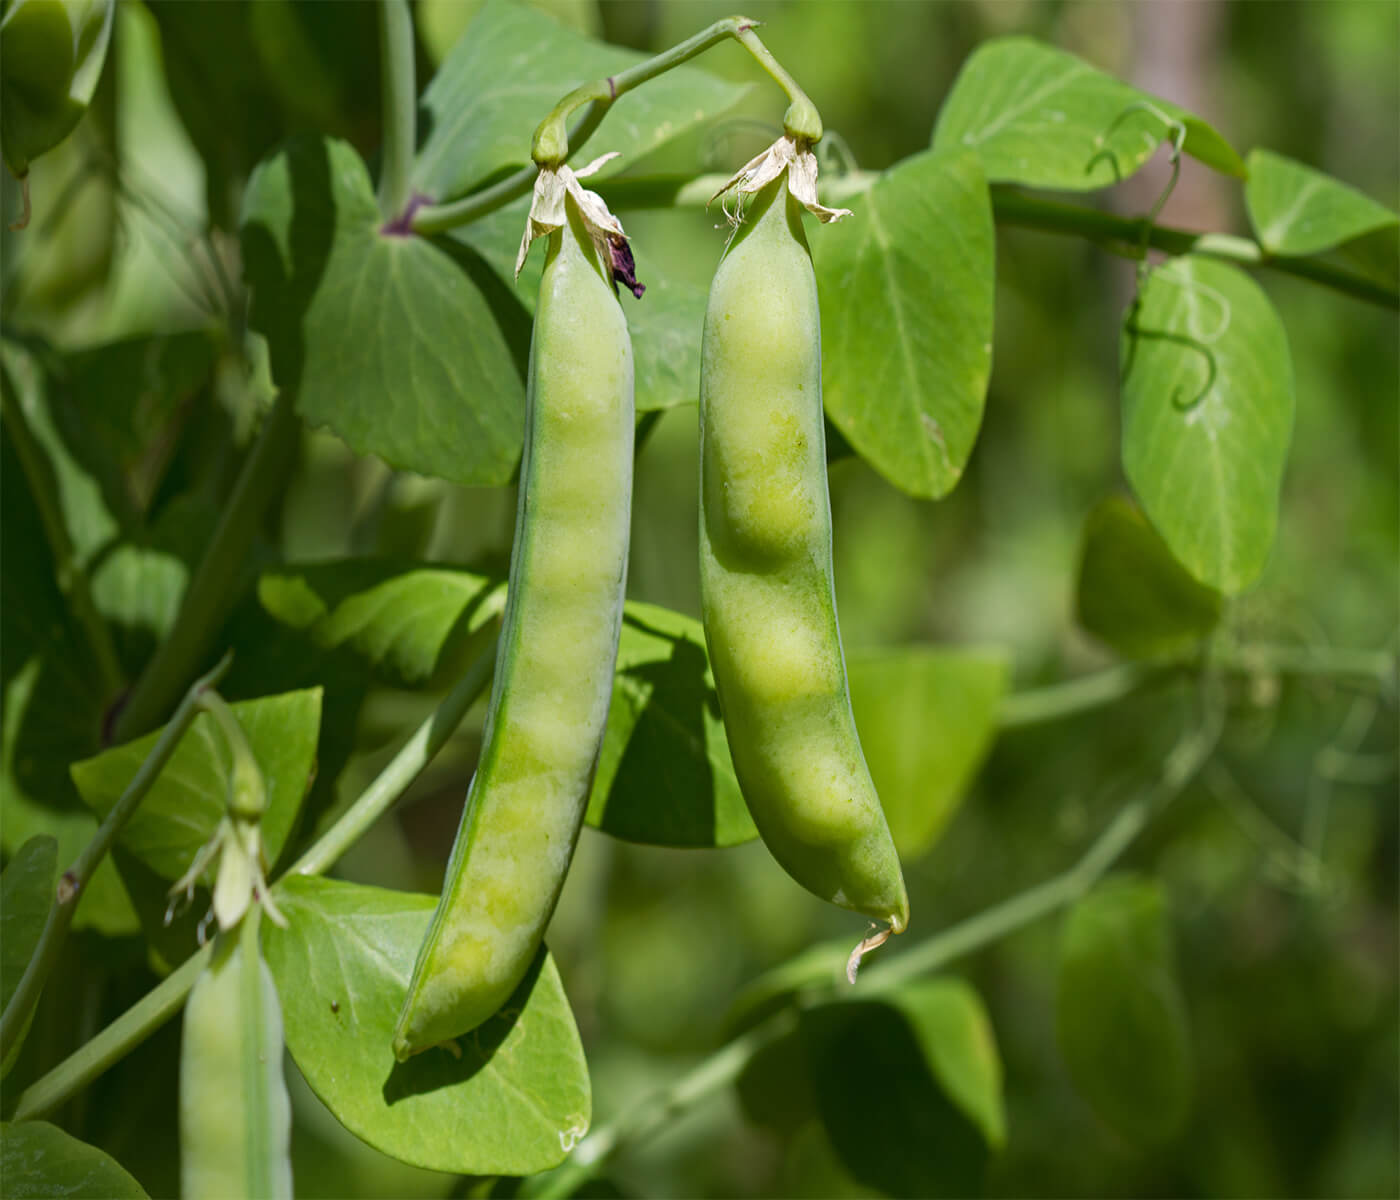 Nutritional characterization of peas and the effects of microwave deactivation